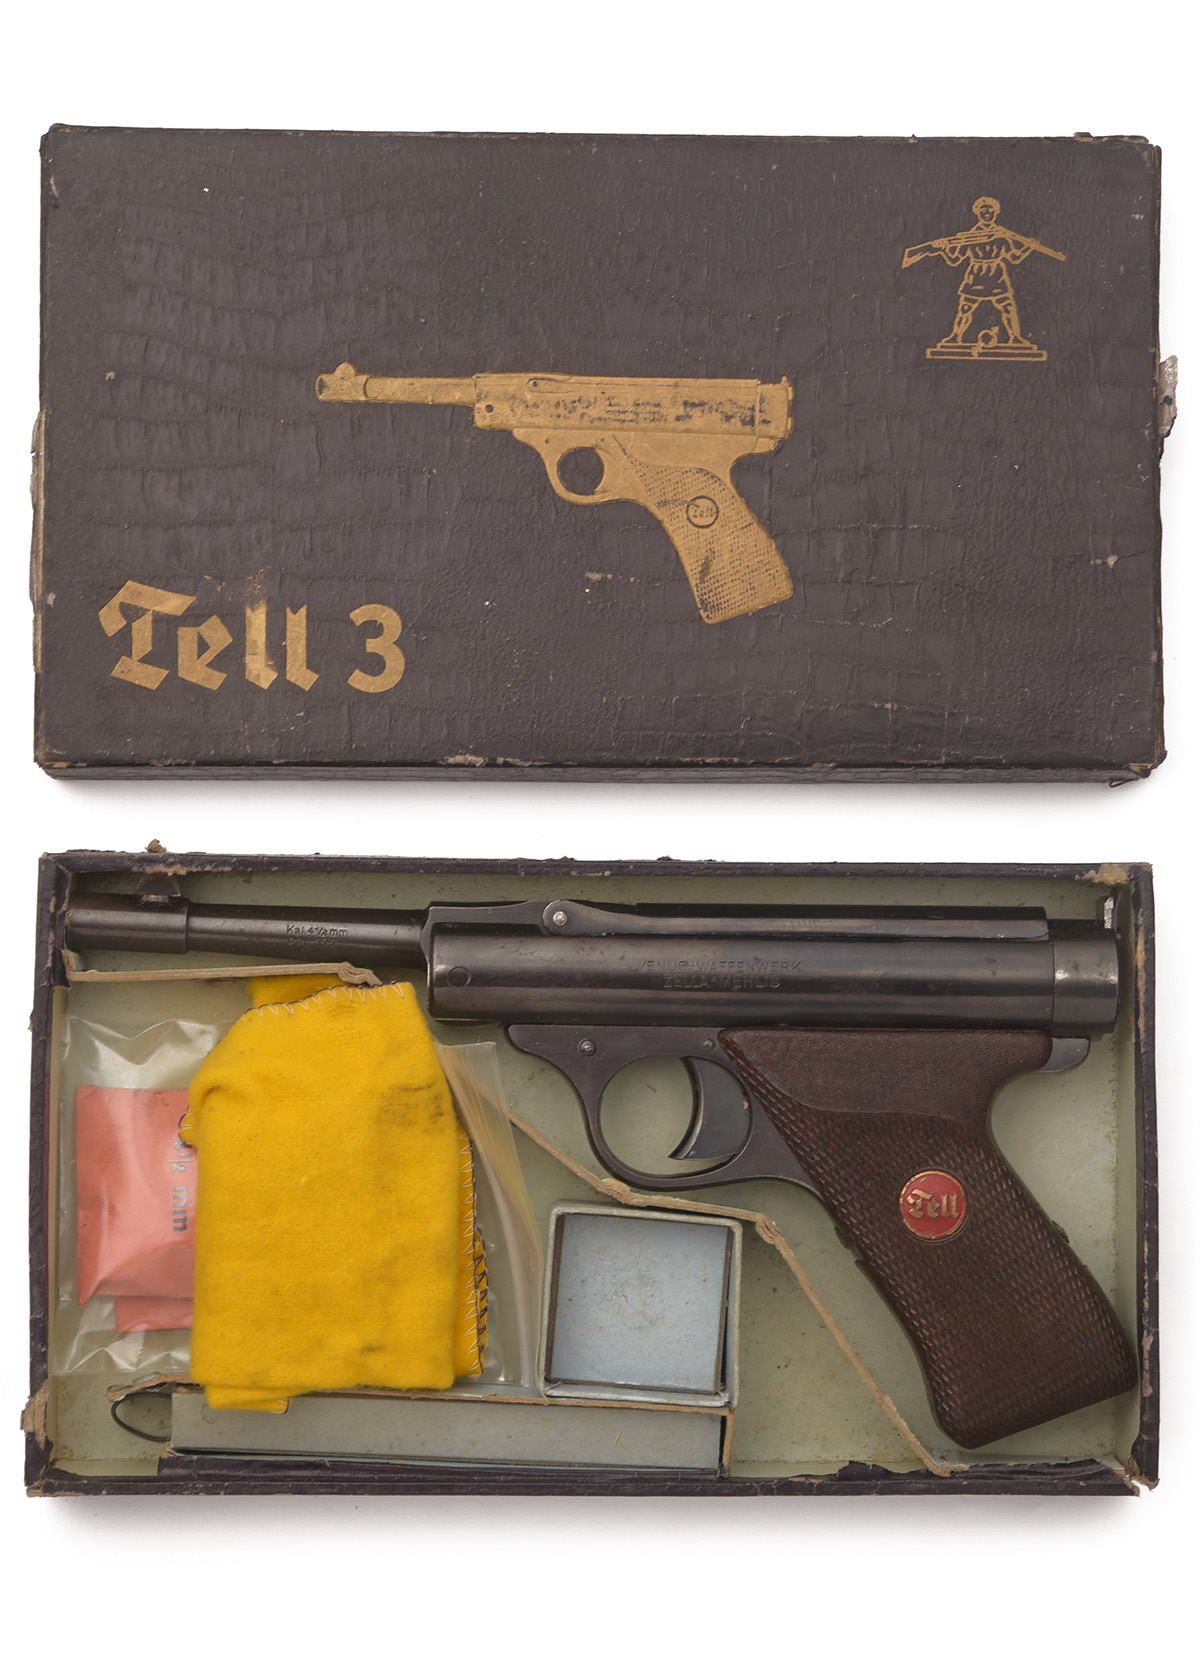 A RARE BOXED .177 VENUS WAFFENWERK 'TELL 3' AIR-PISTOL, serial no. 179, one of only a small number